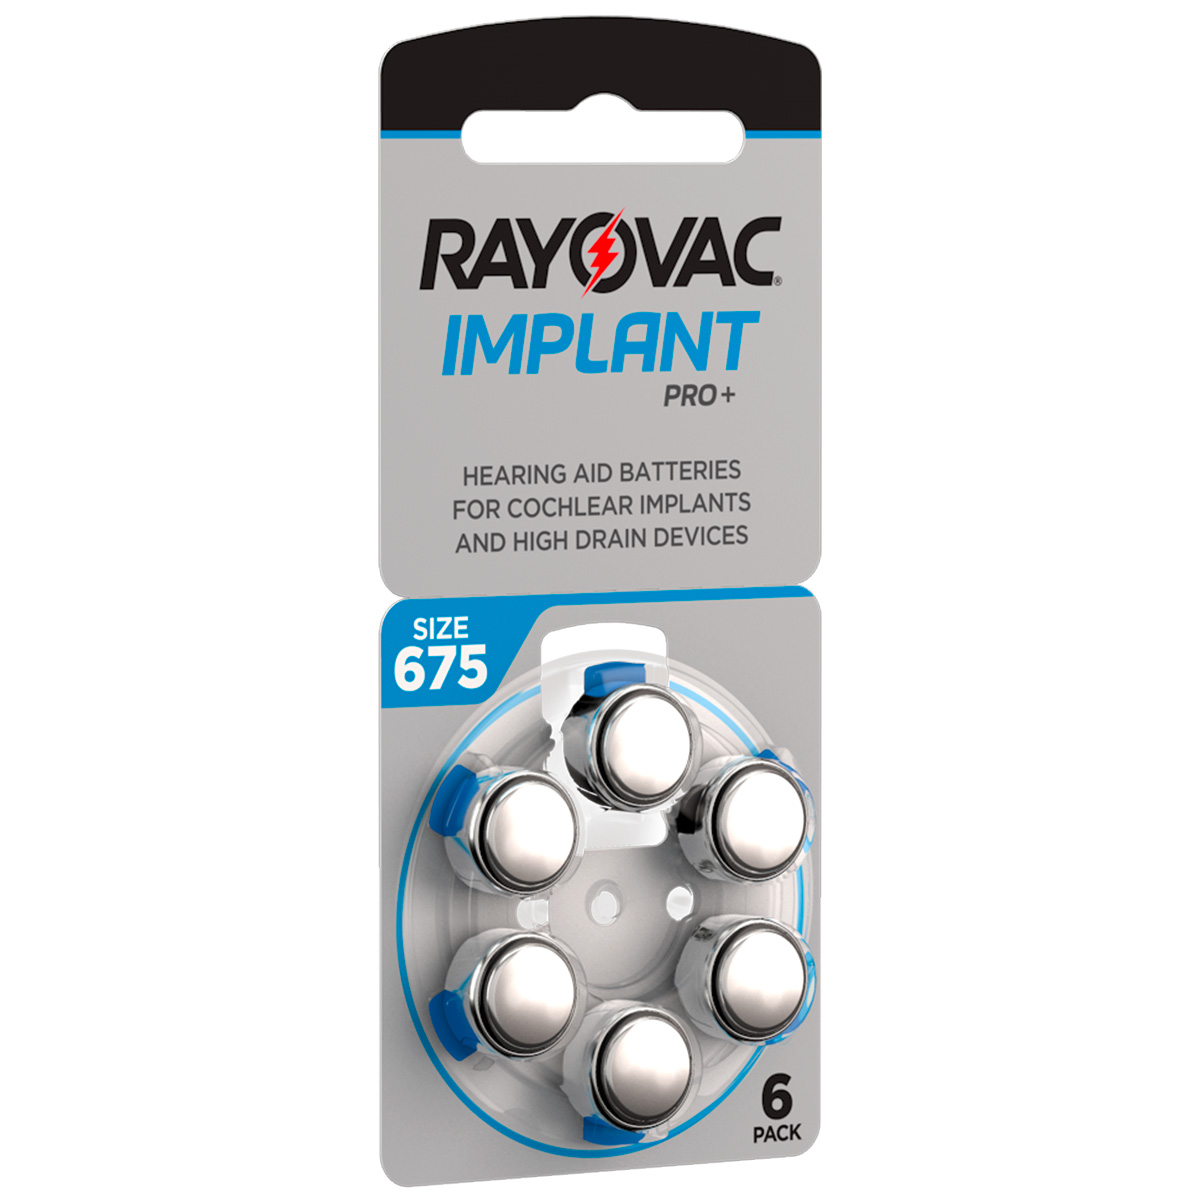 Rayovac Implant Pro+, 6 hearing aid batteries No. 675 for cochlear implants,blister